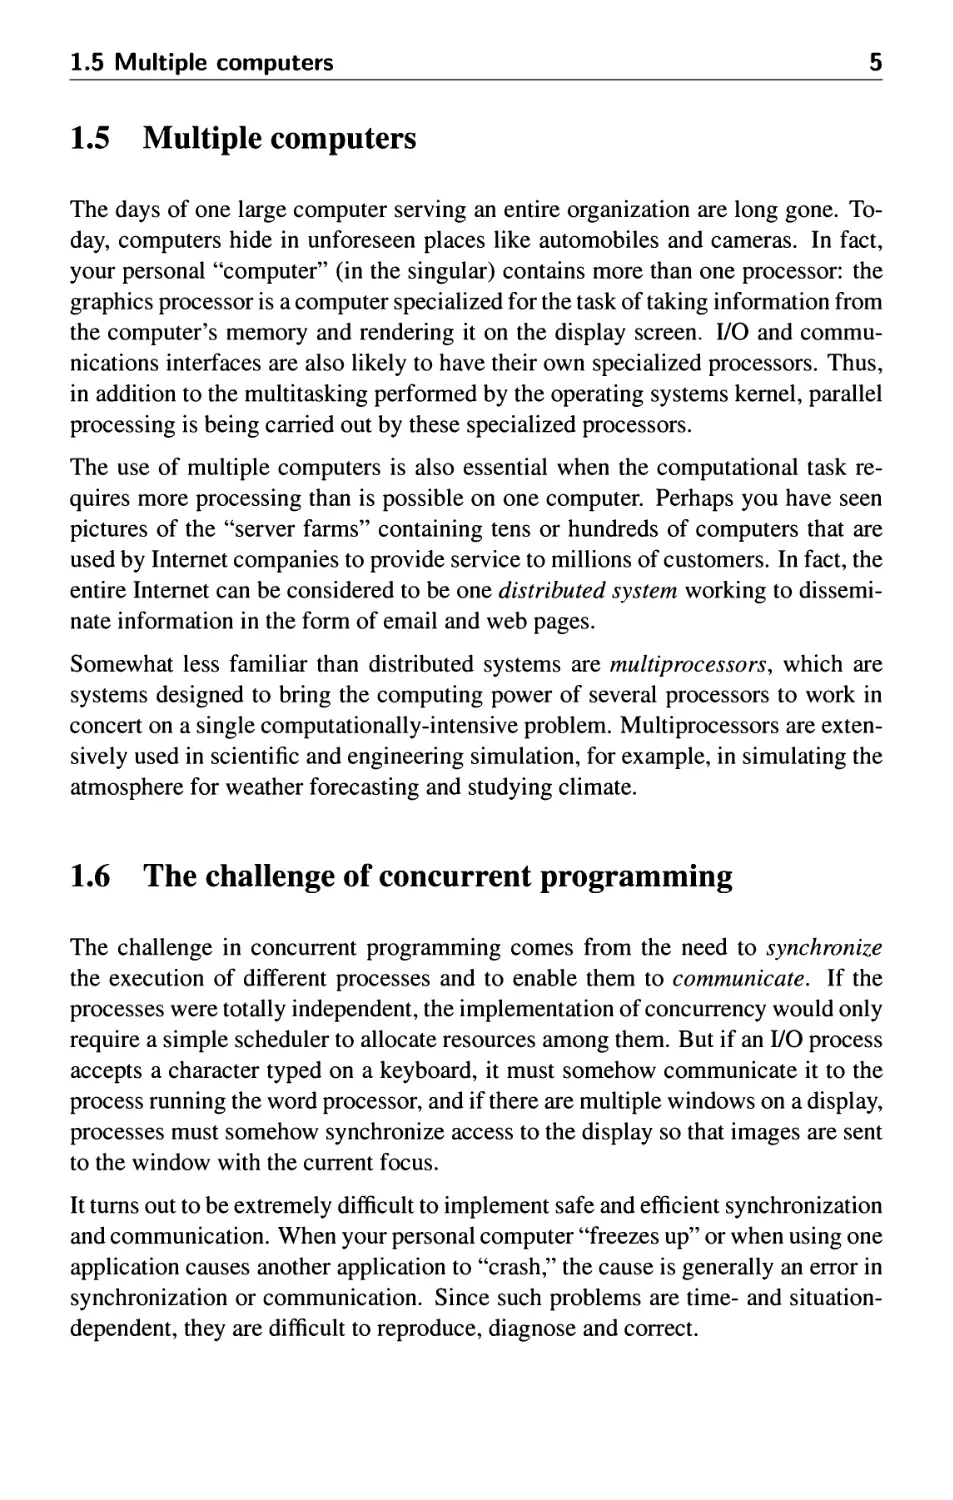 1.5 Multiple computers
1.6 The challenge of concurrent programming